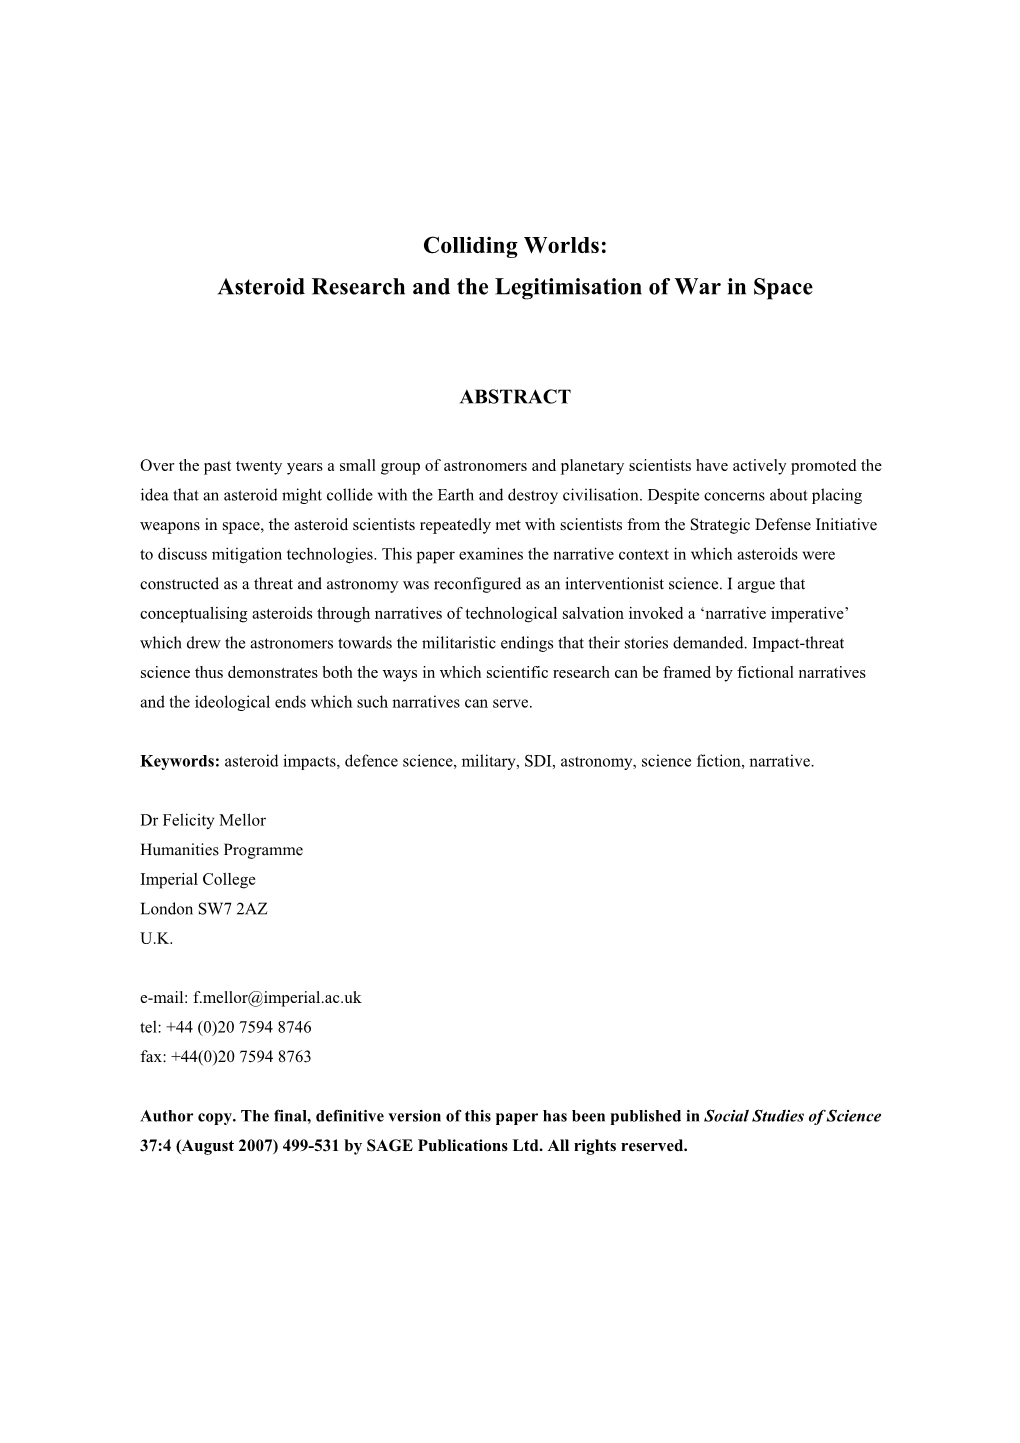 Colliding Worlds: Asteroid Research and the Legitimisation of War in Space